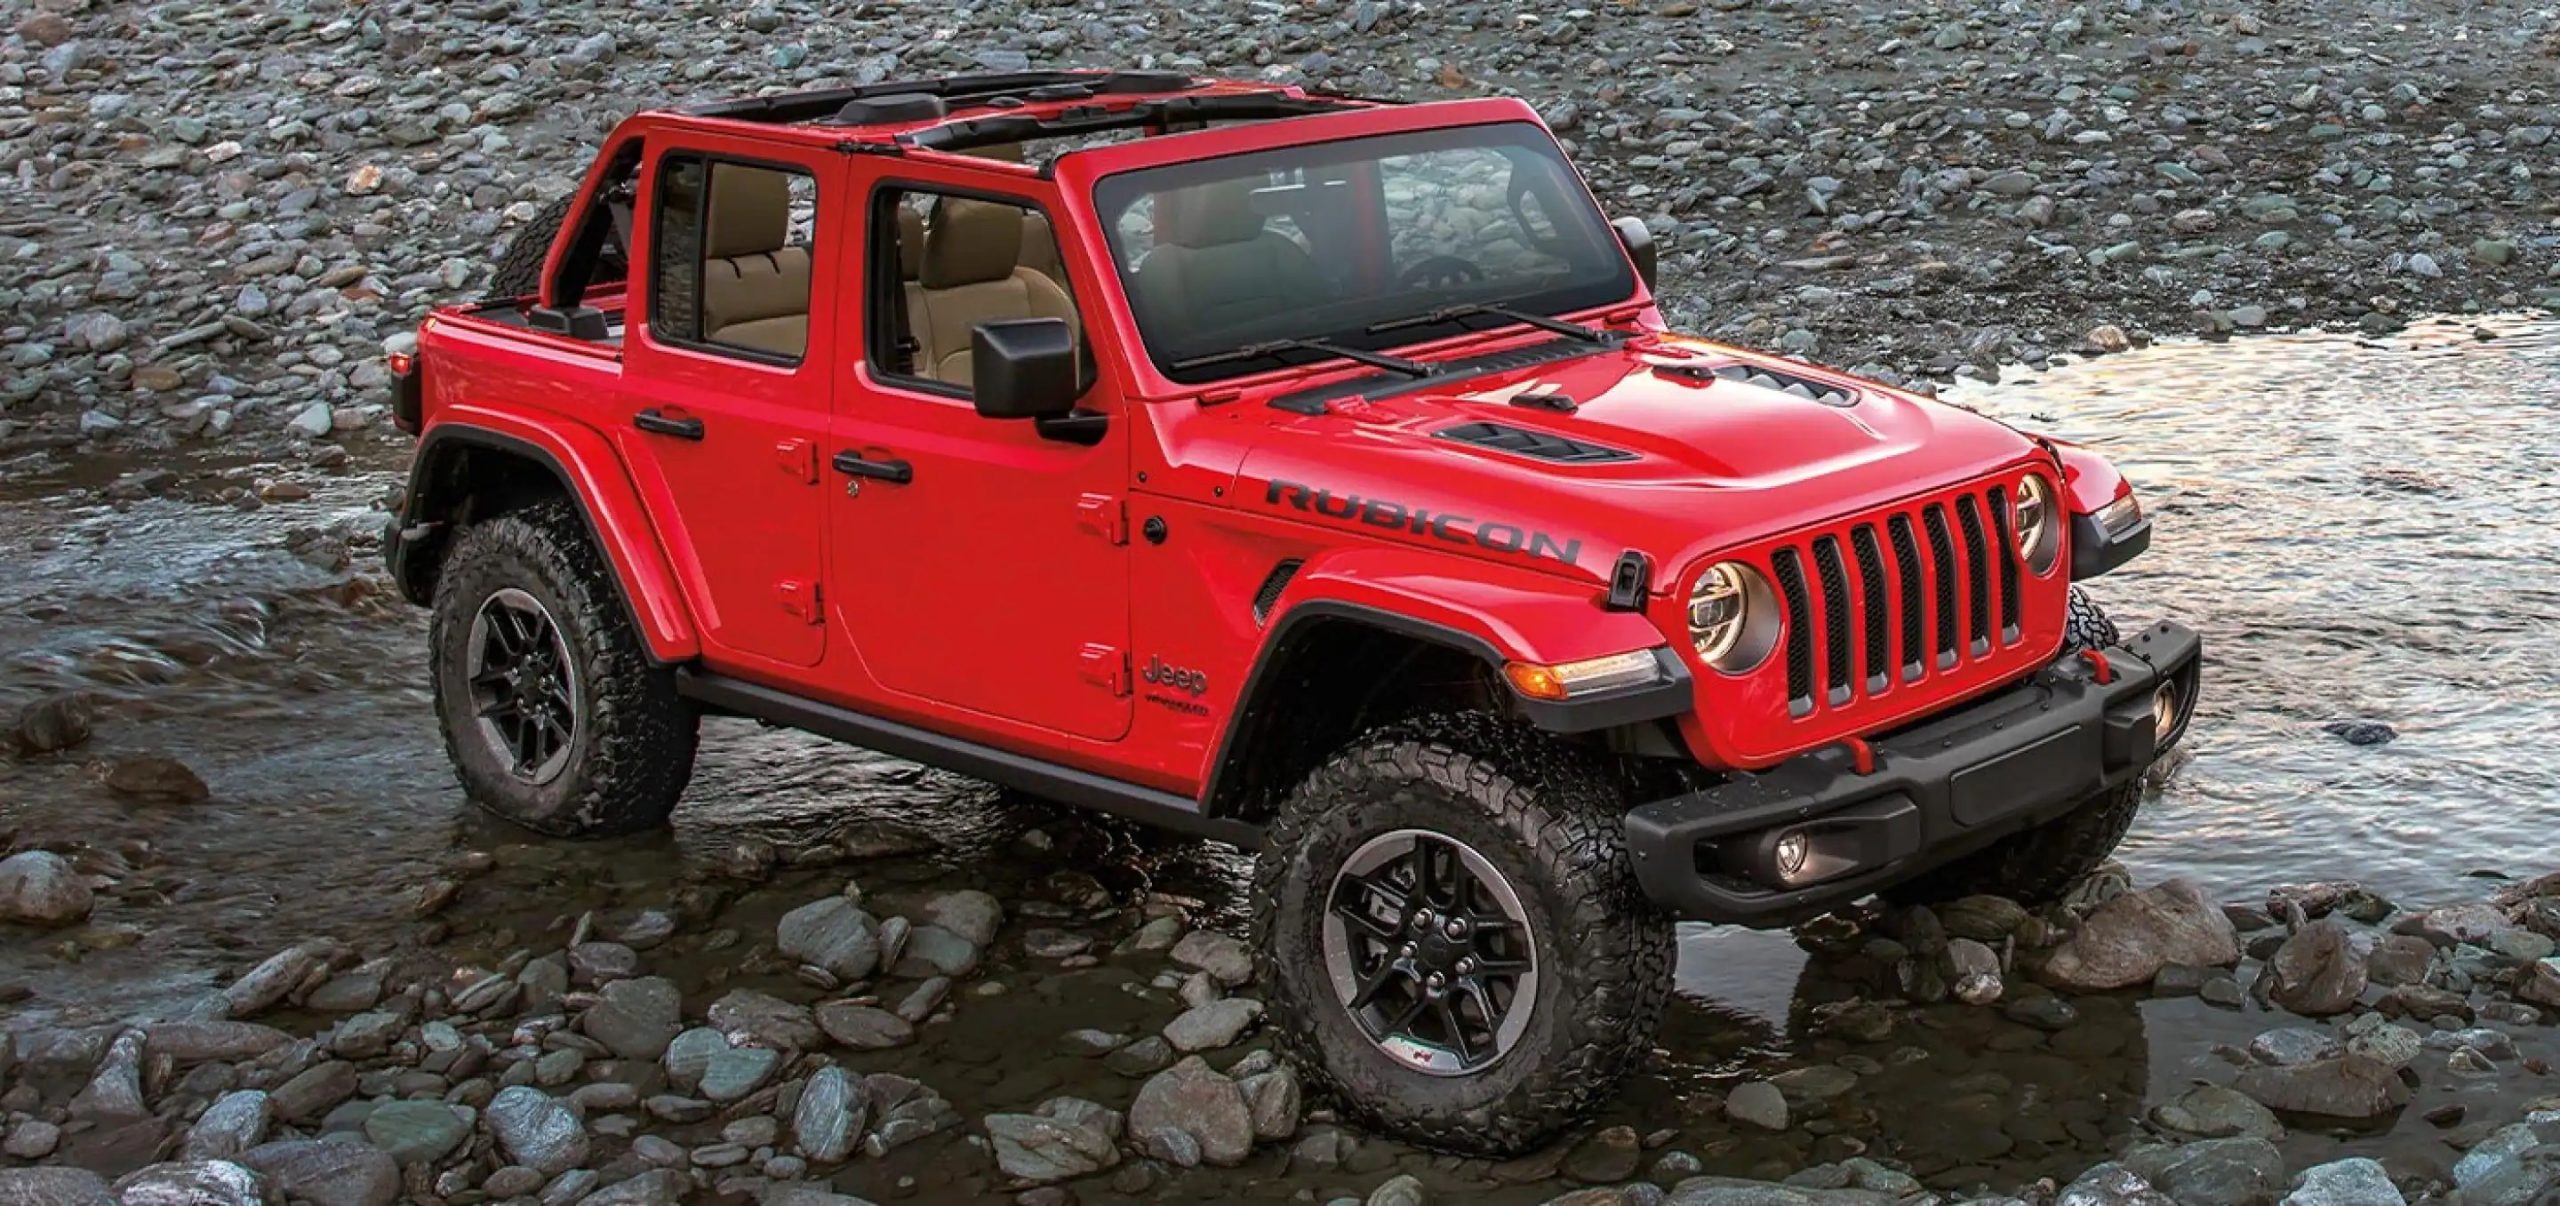 Jeep Wrangler For Sale Columbus, Browse Online | Paul SherryPaul Sherry  Chrysler Dodge Jeep RAM